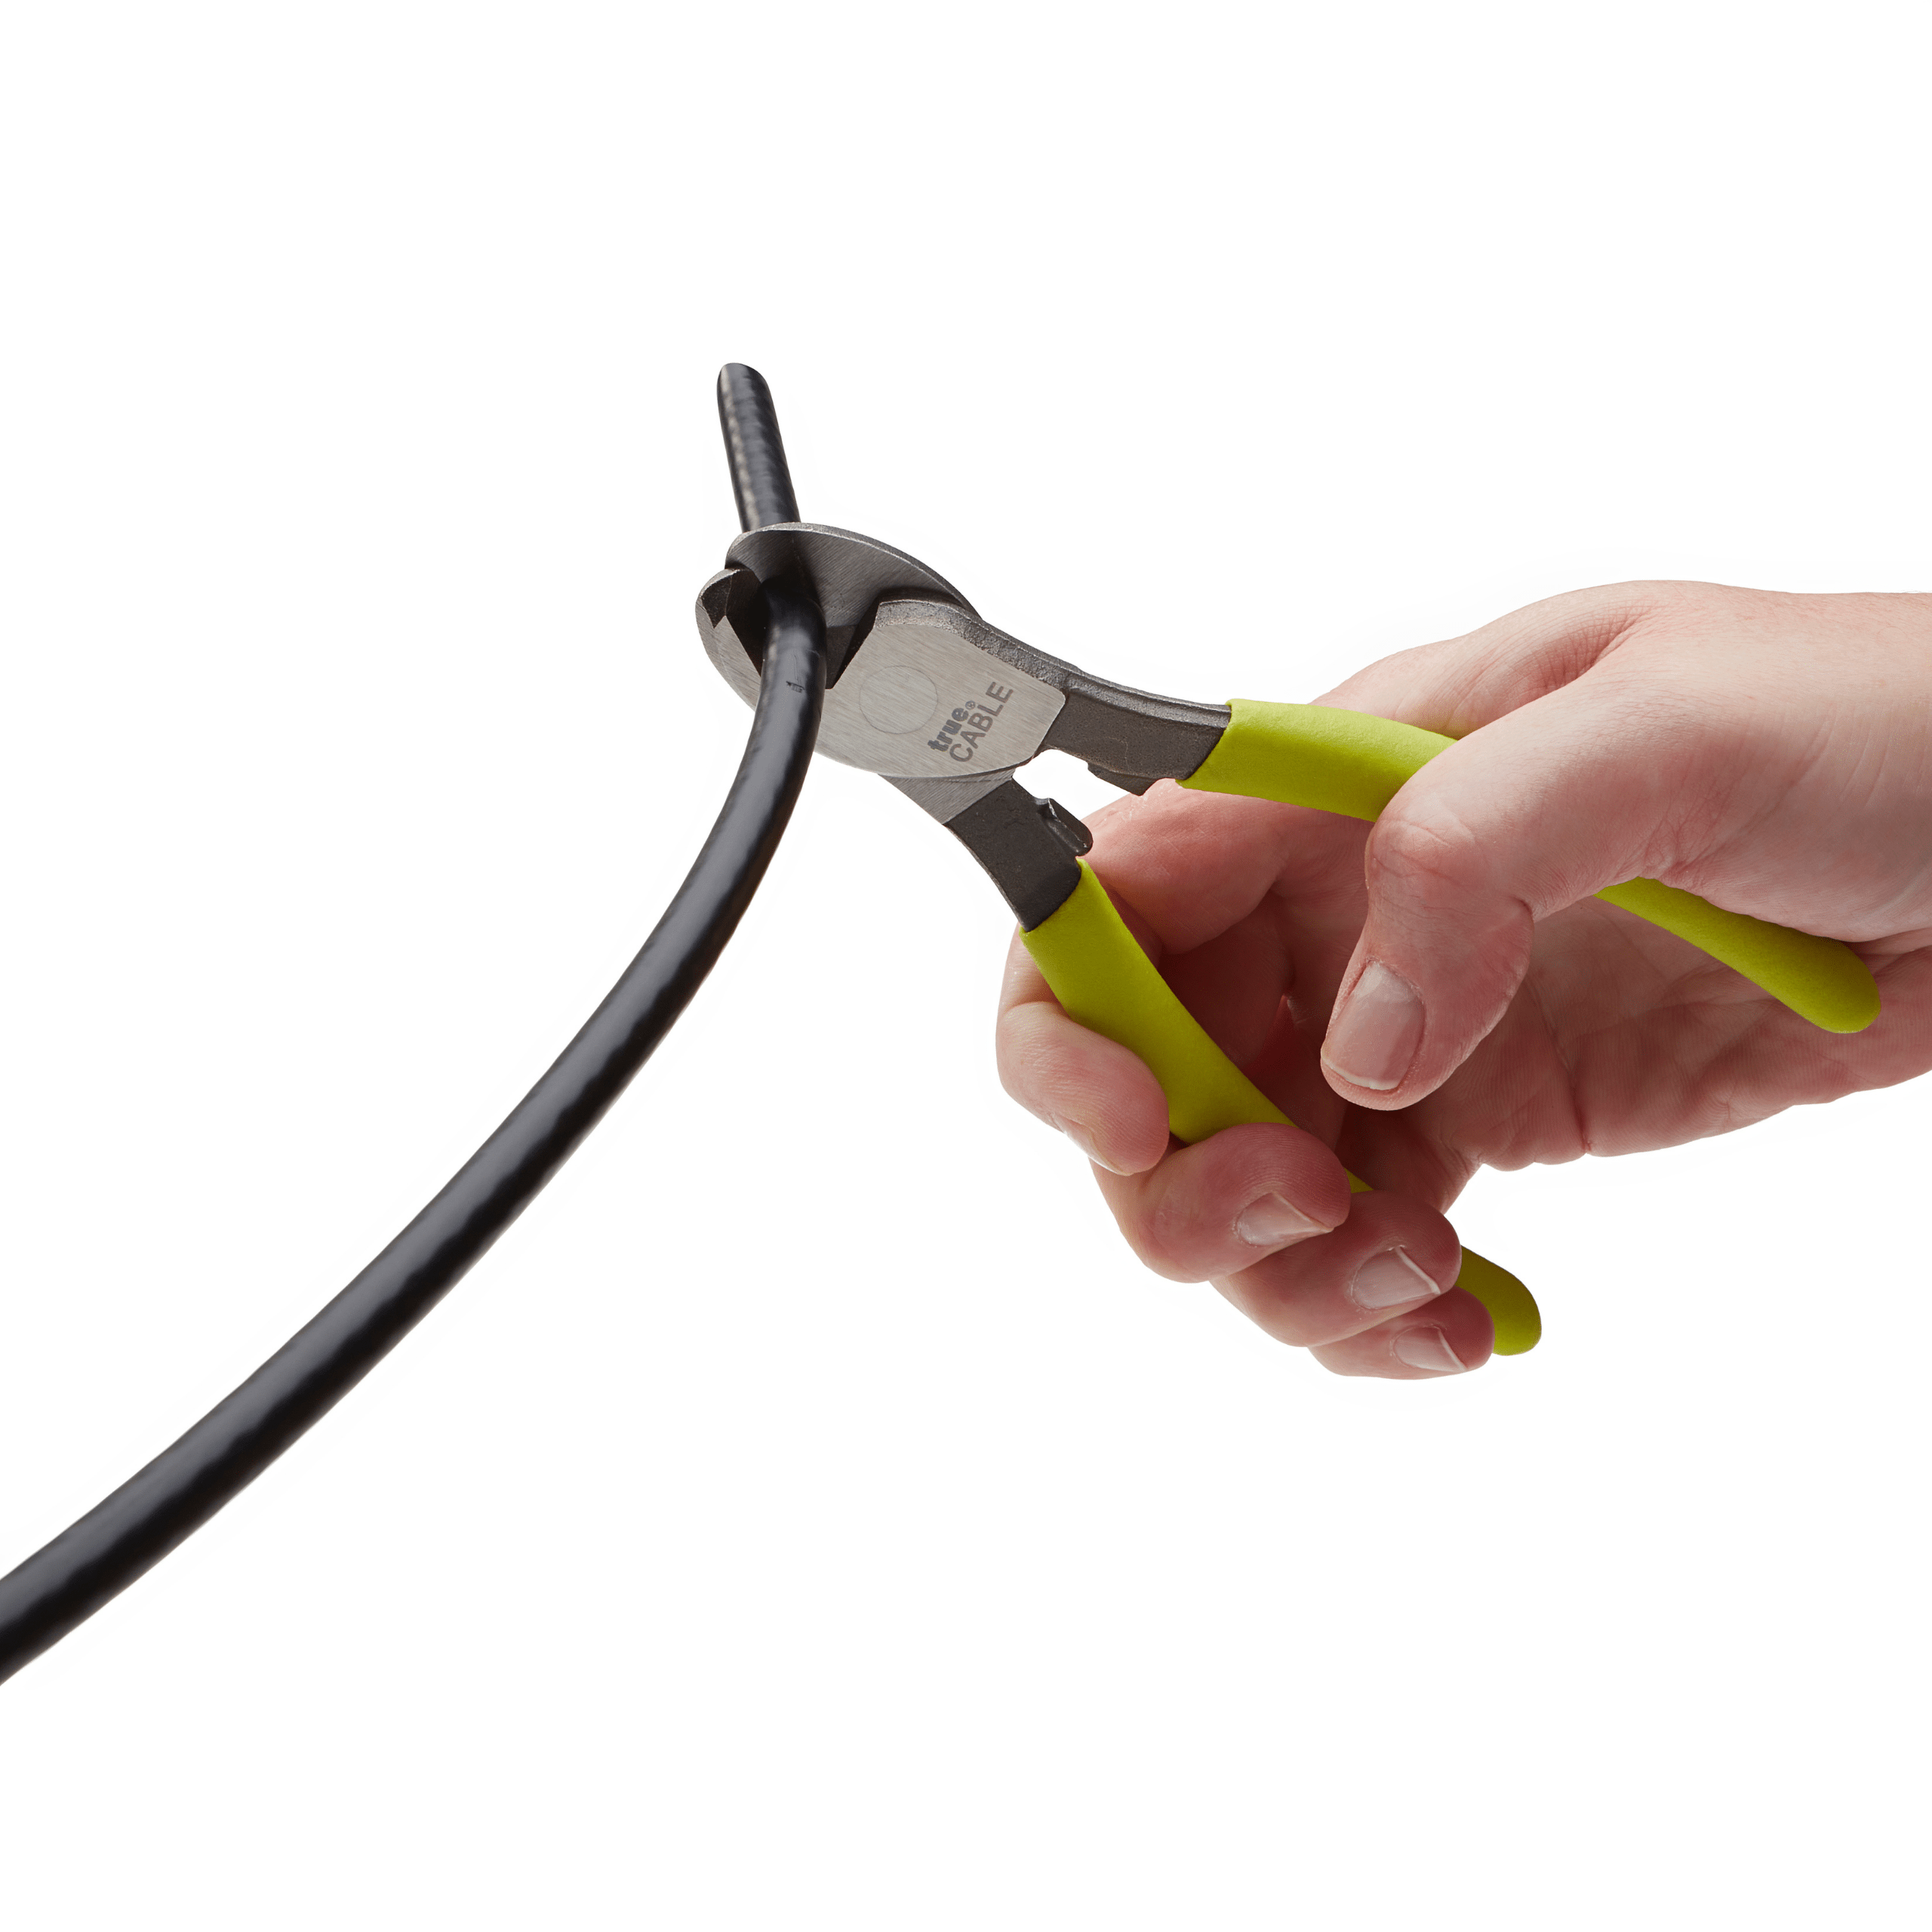 Heavy Duty Cable Cutters | trueCABLE TrueCut